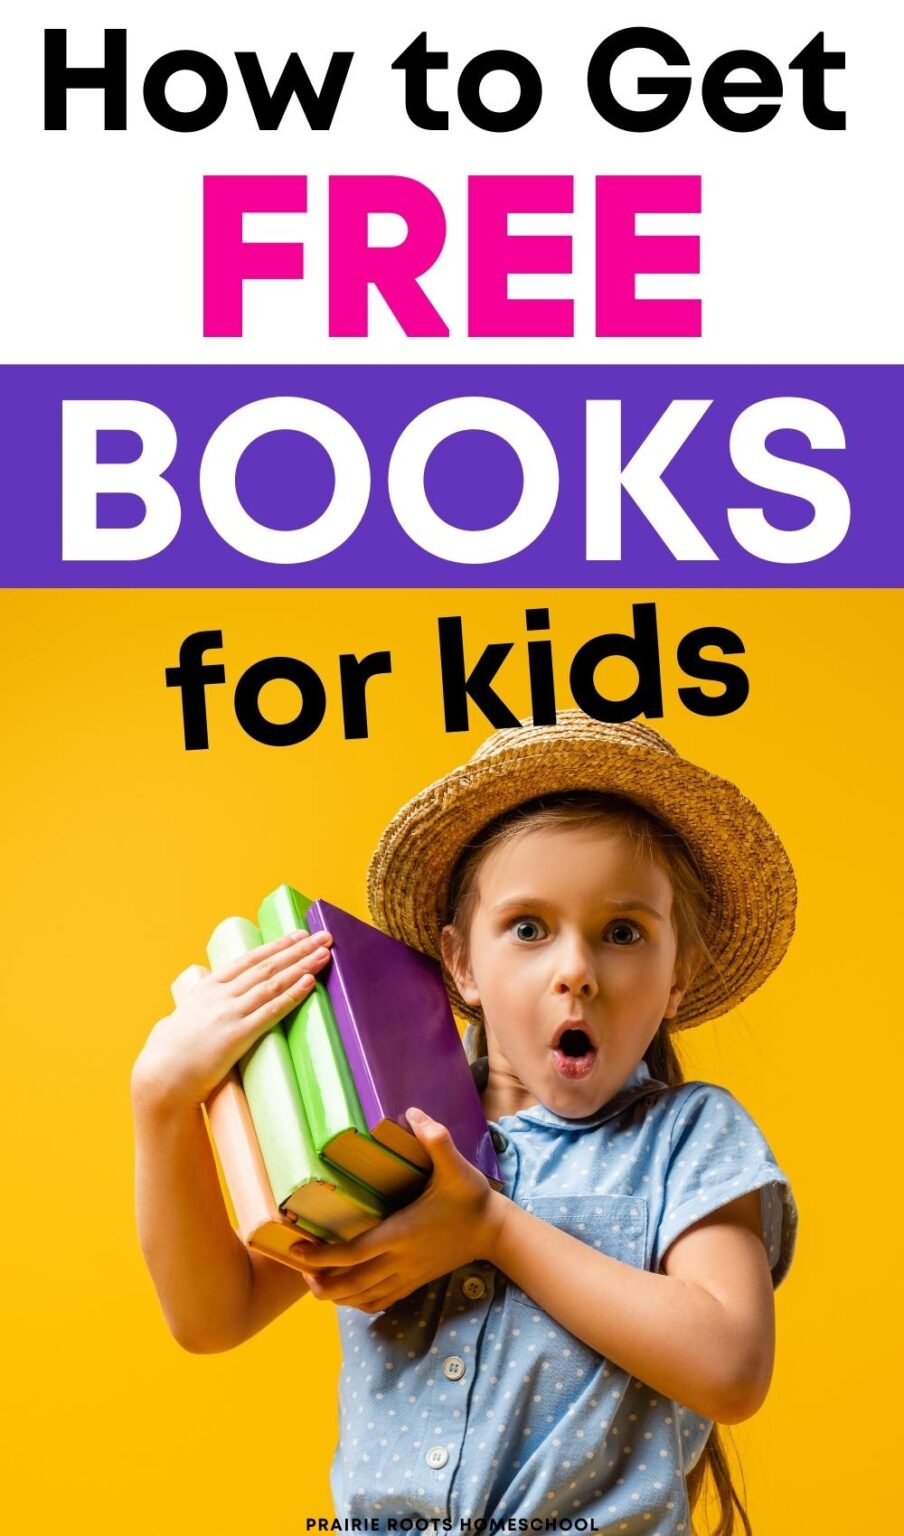 how-to-get-free-books-for-kids-by-mail-and-more-prairie-roots-homeschool